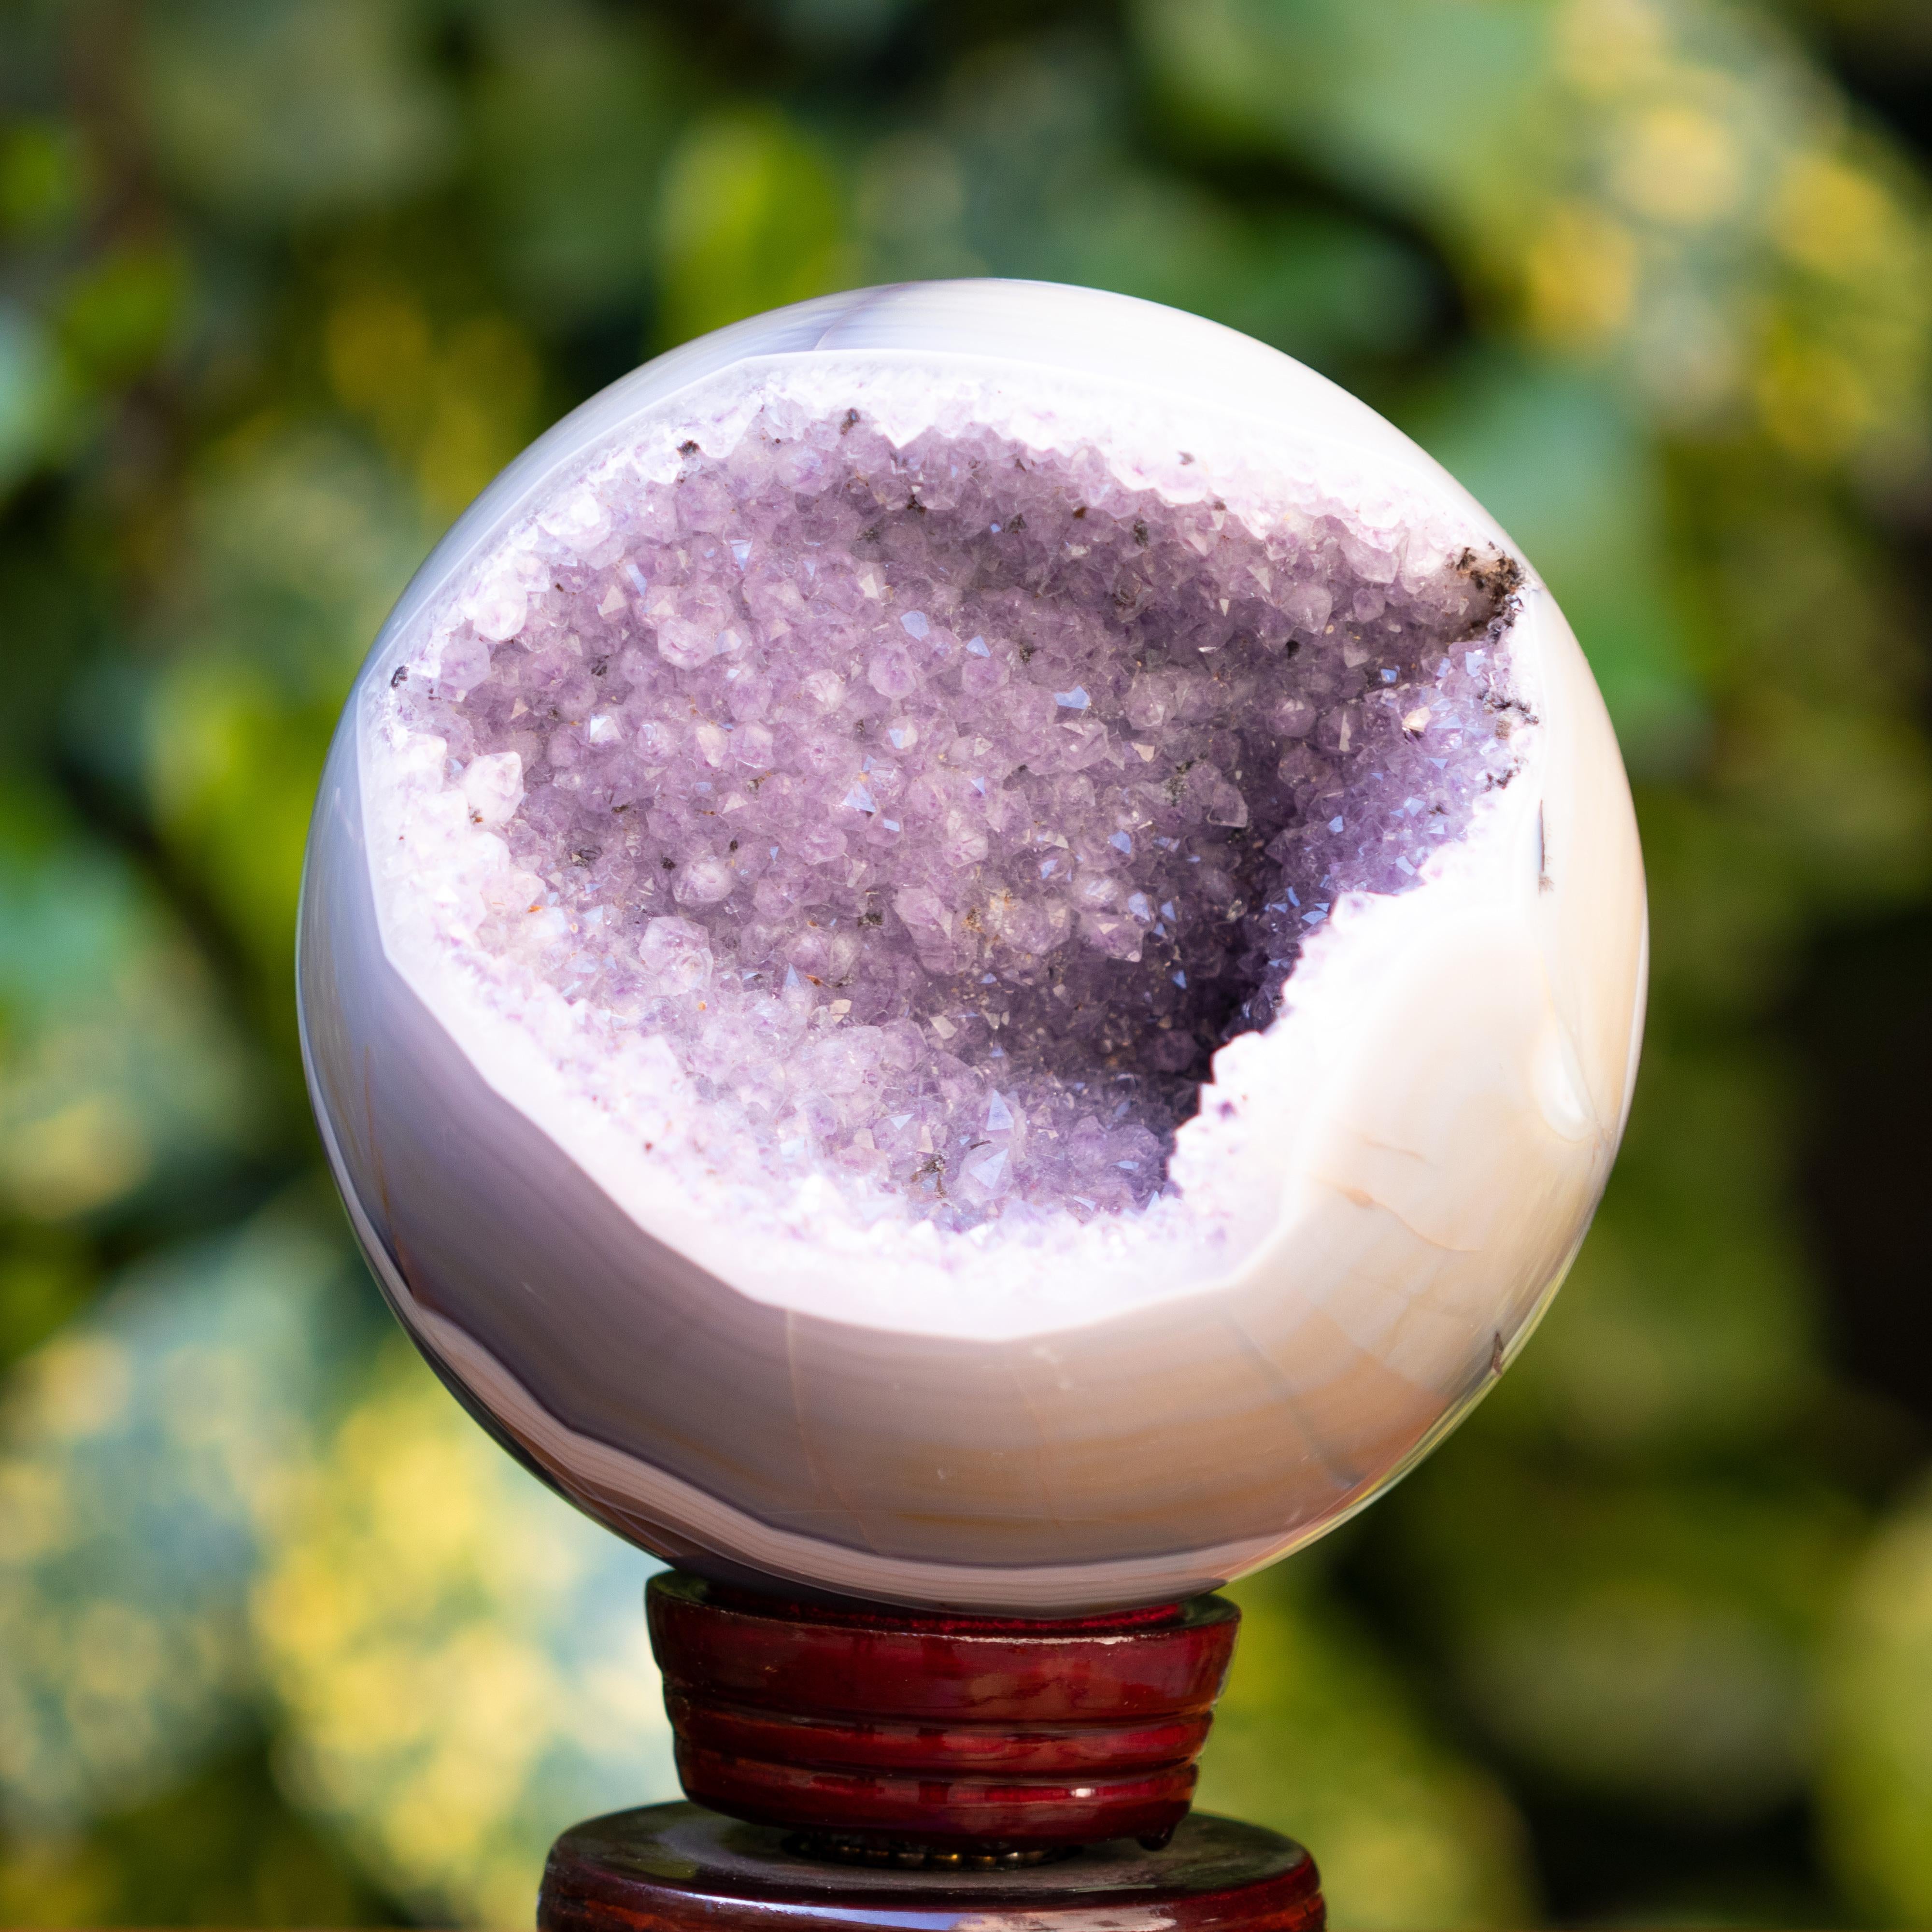 This Crystal Sphere is composed of light purple Agate geode and druze Amethyst minerals which are one of the most powerful crystal healers; focused in growth and stability. A crystal sphere emits a very high frequency of harmony and positive energy